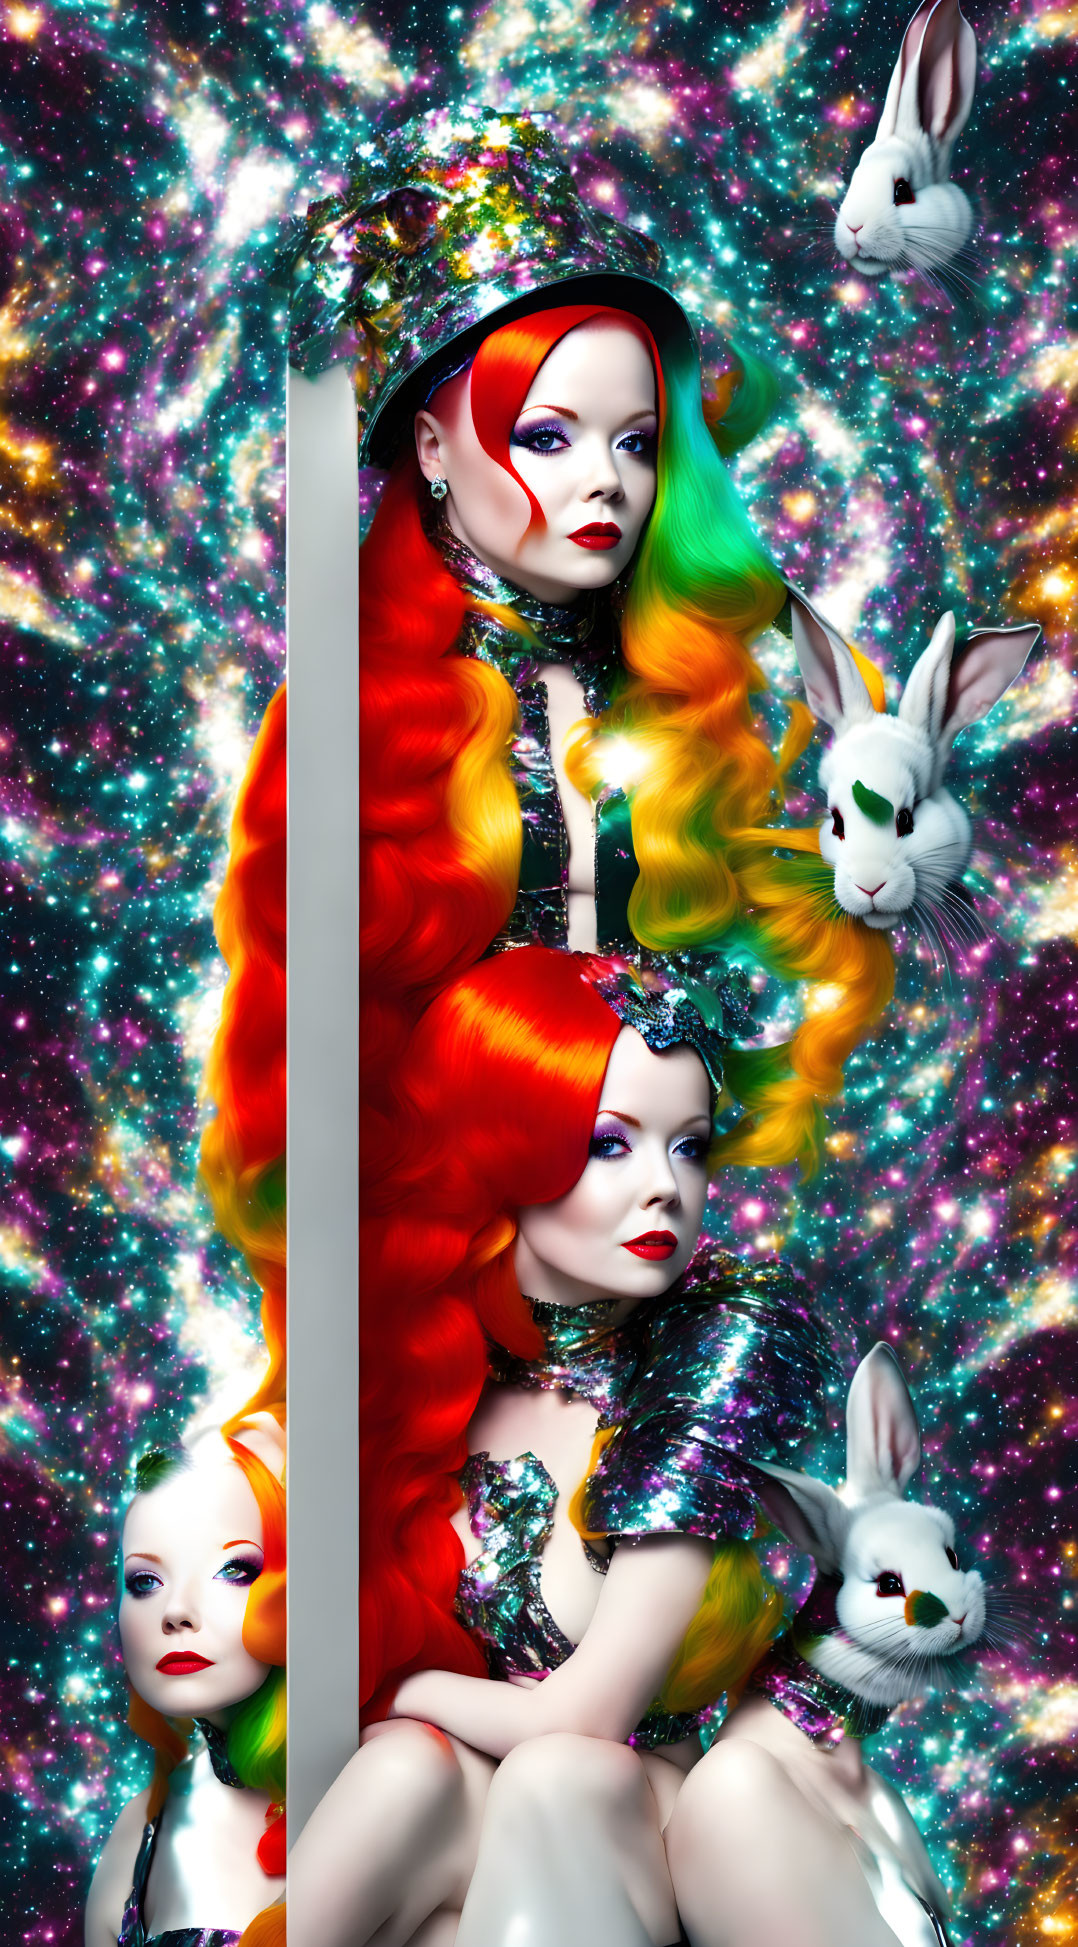 Colorful cosmic image: Three women with multicolored hair, makeup, two white rabbits, star